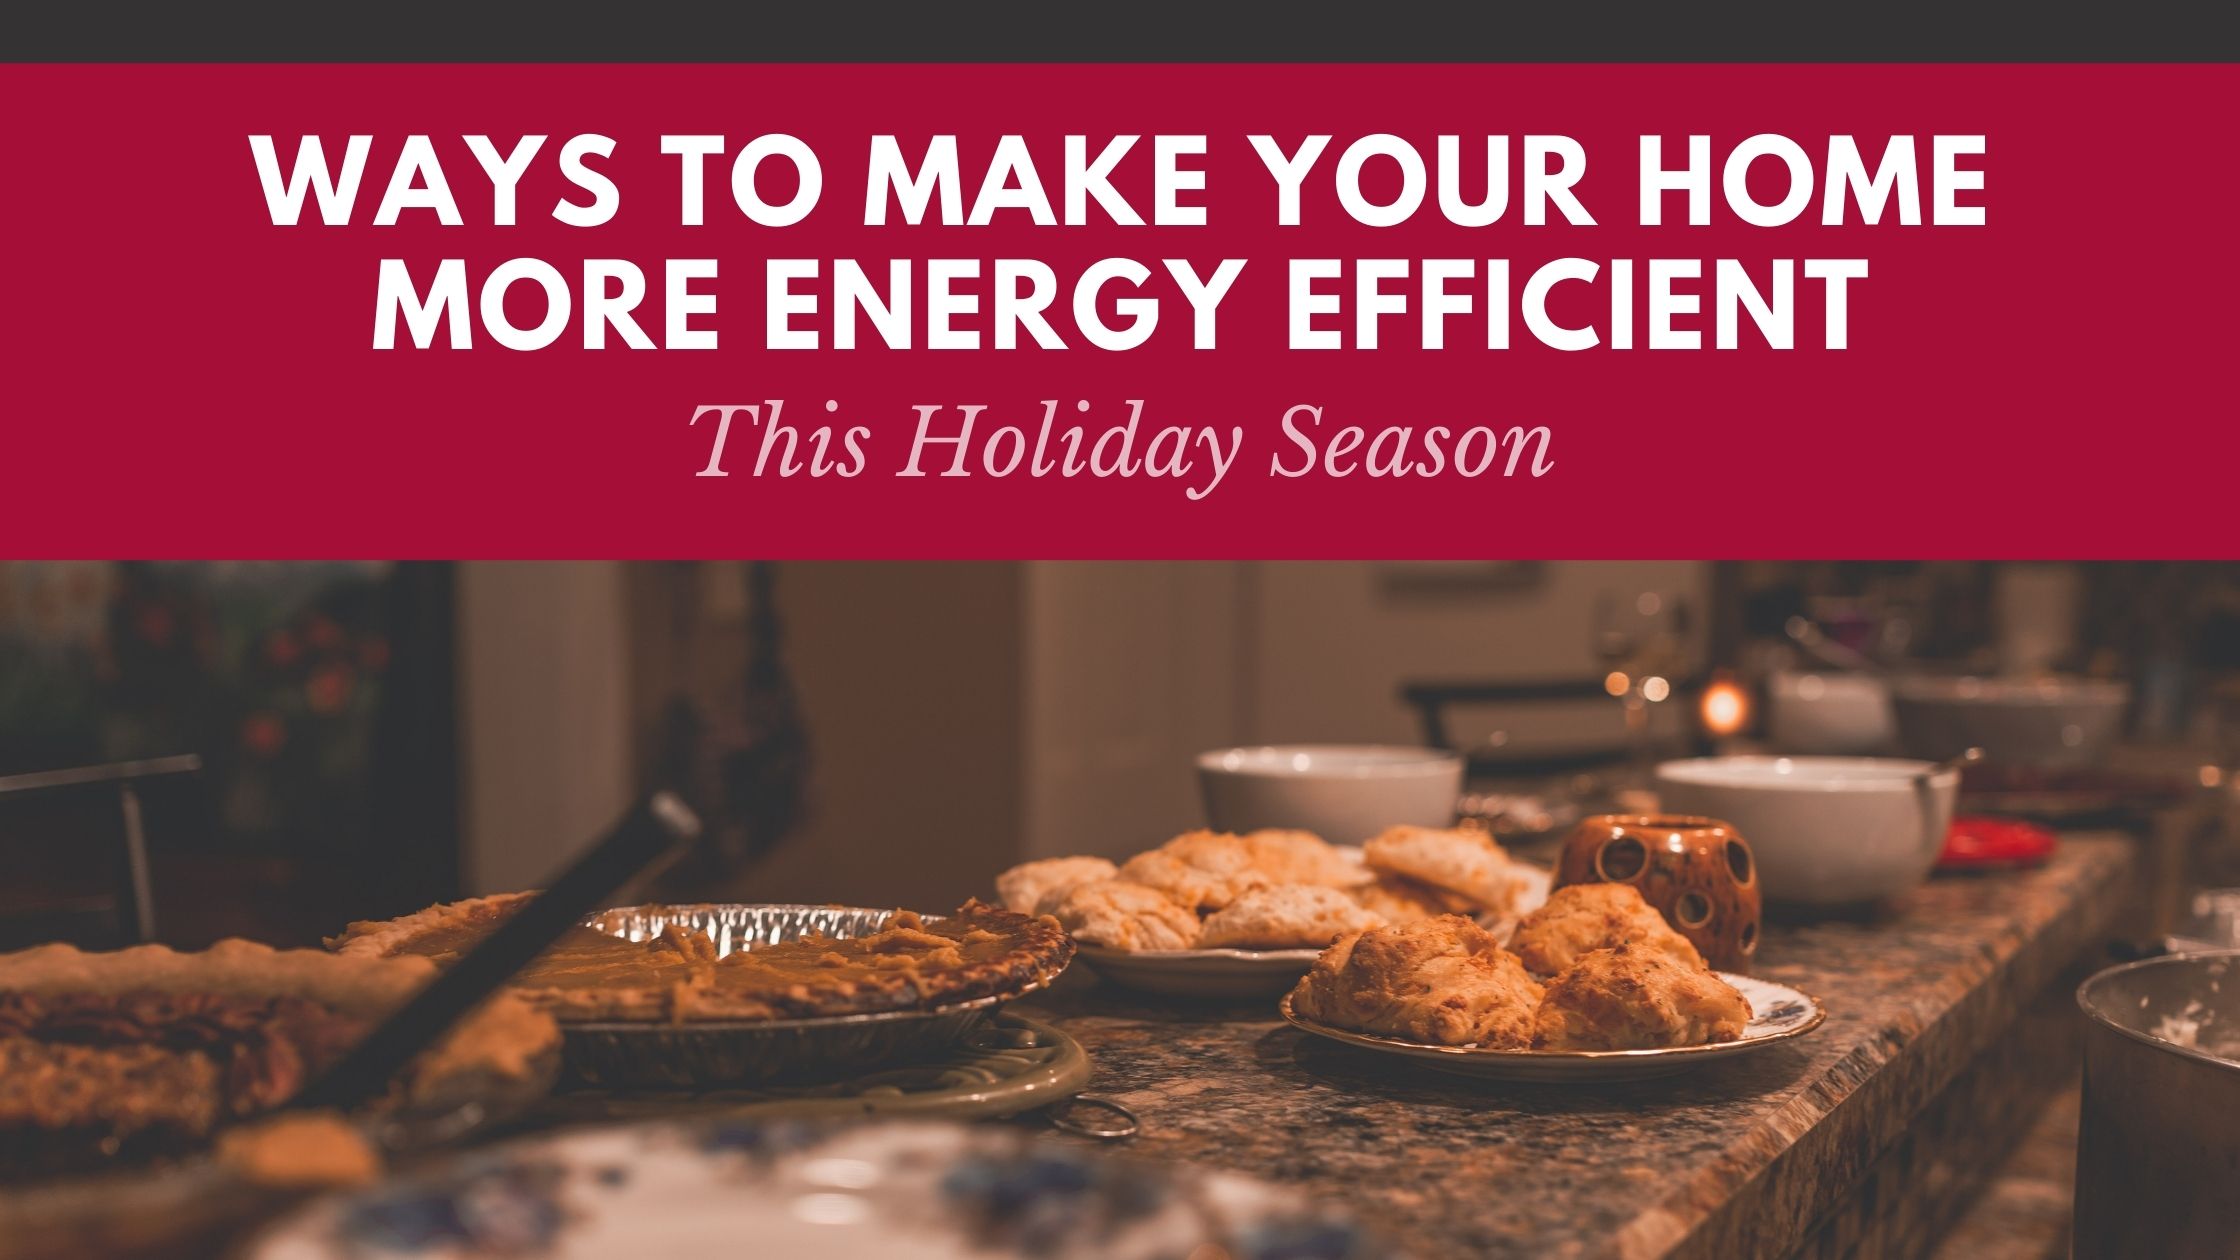 Ways To Make Your Home More Energy Efficient This Holiday Season